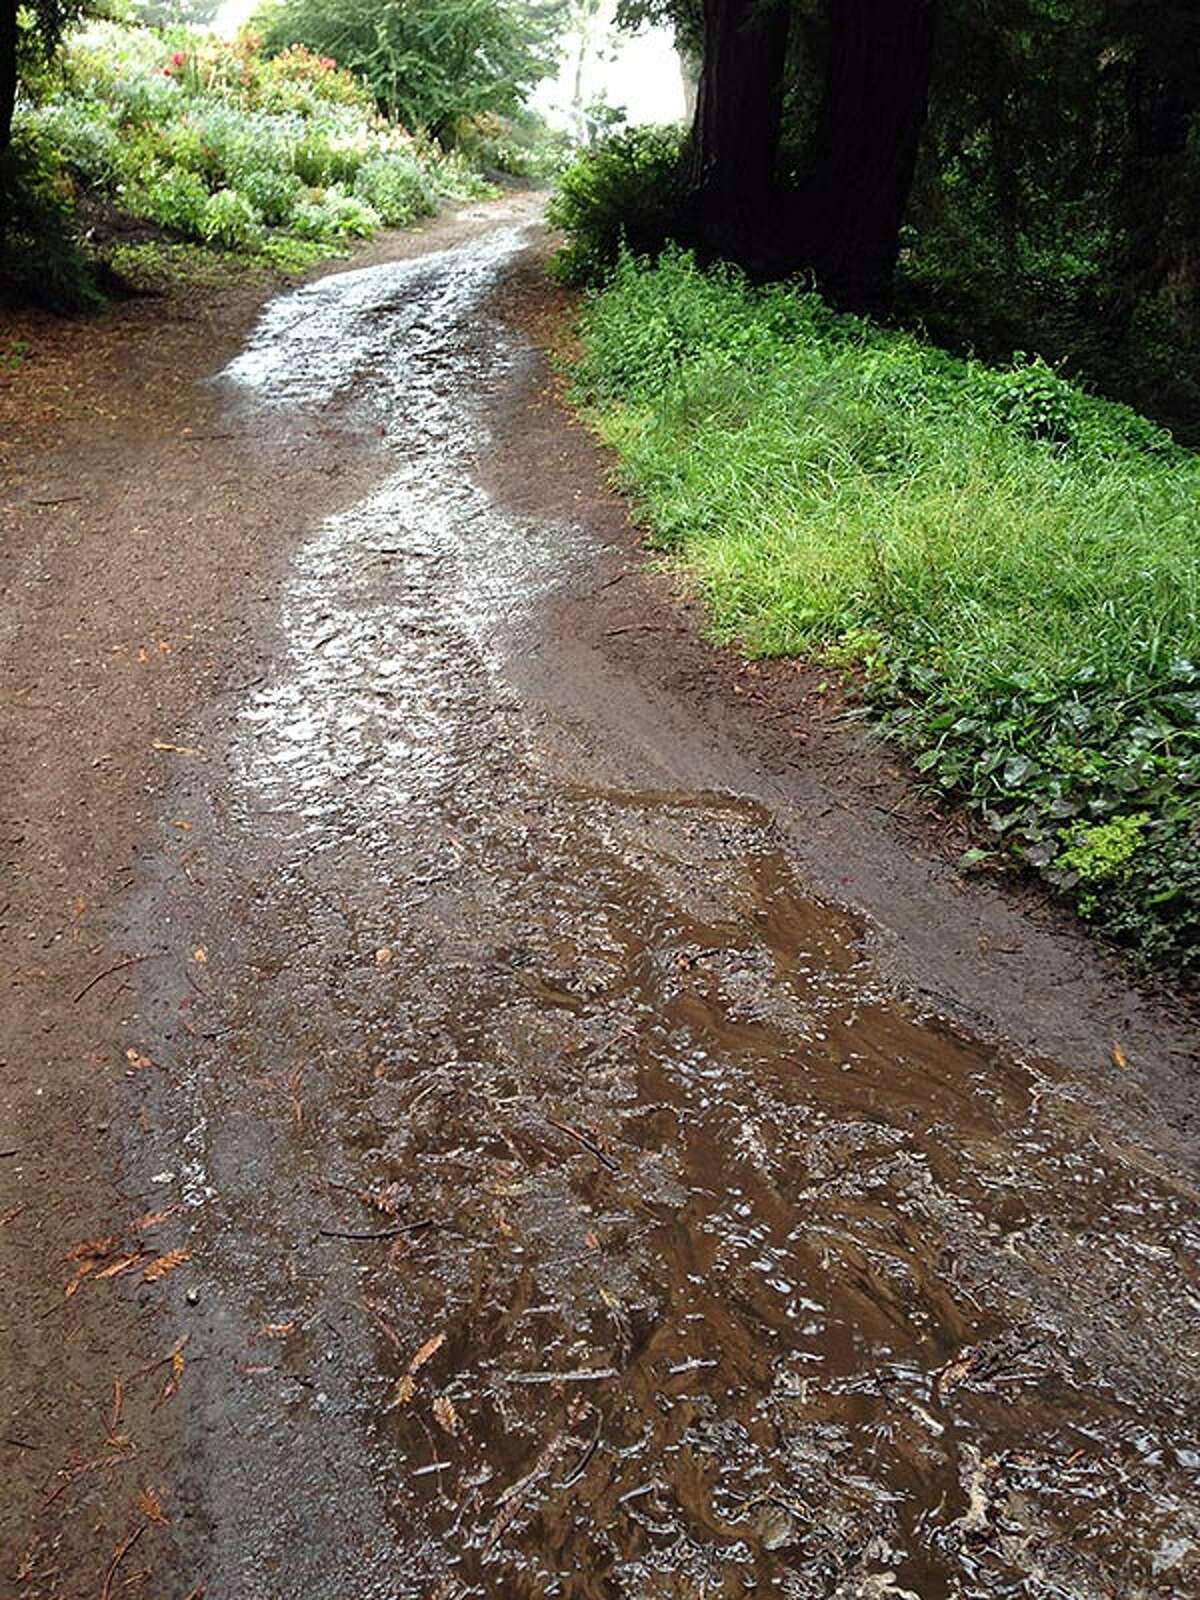 Irrigation water pools on a path in San Francisco’s Golden Gate Park as this reader-submitted photo shows.